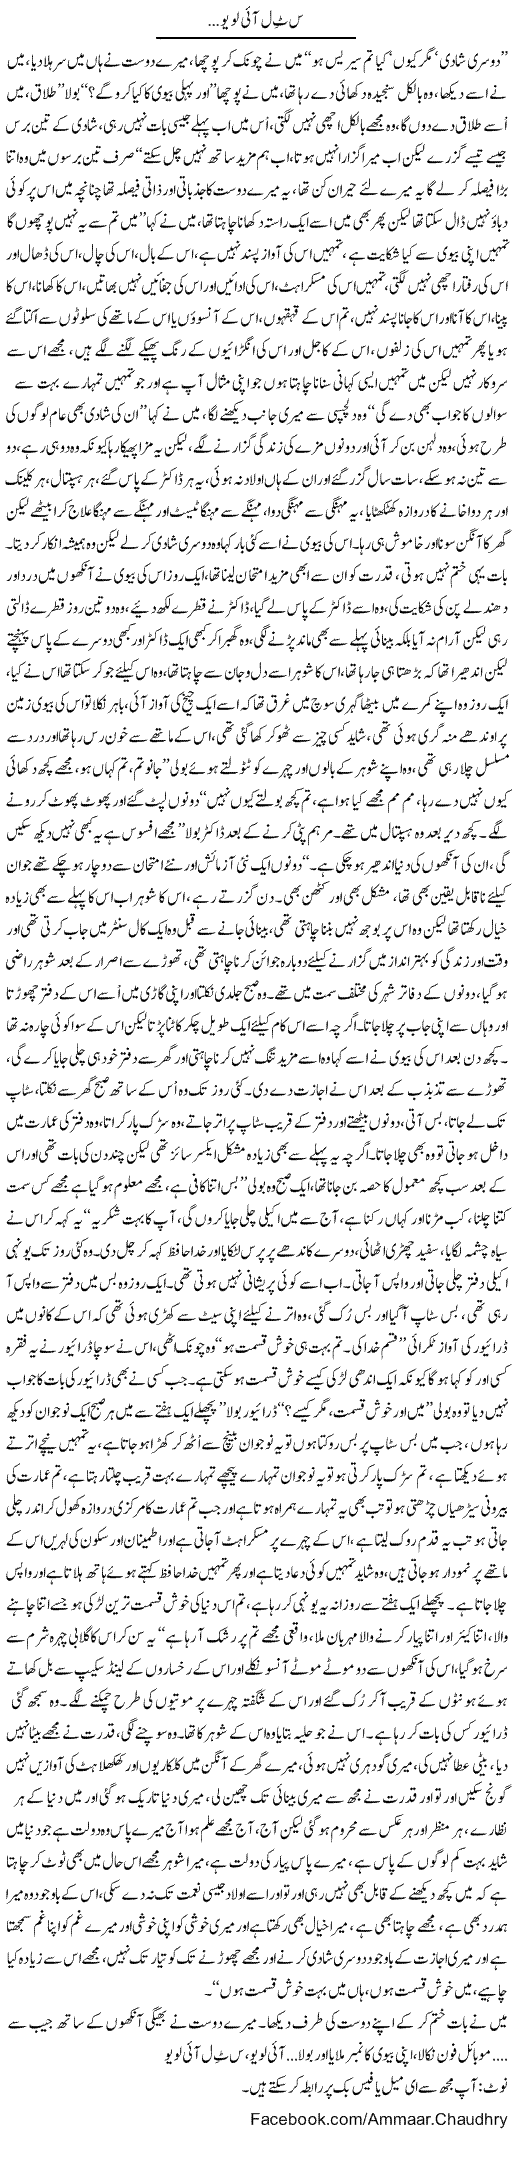 I Love You Express Column Amad Chuadhry 19 June 2011